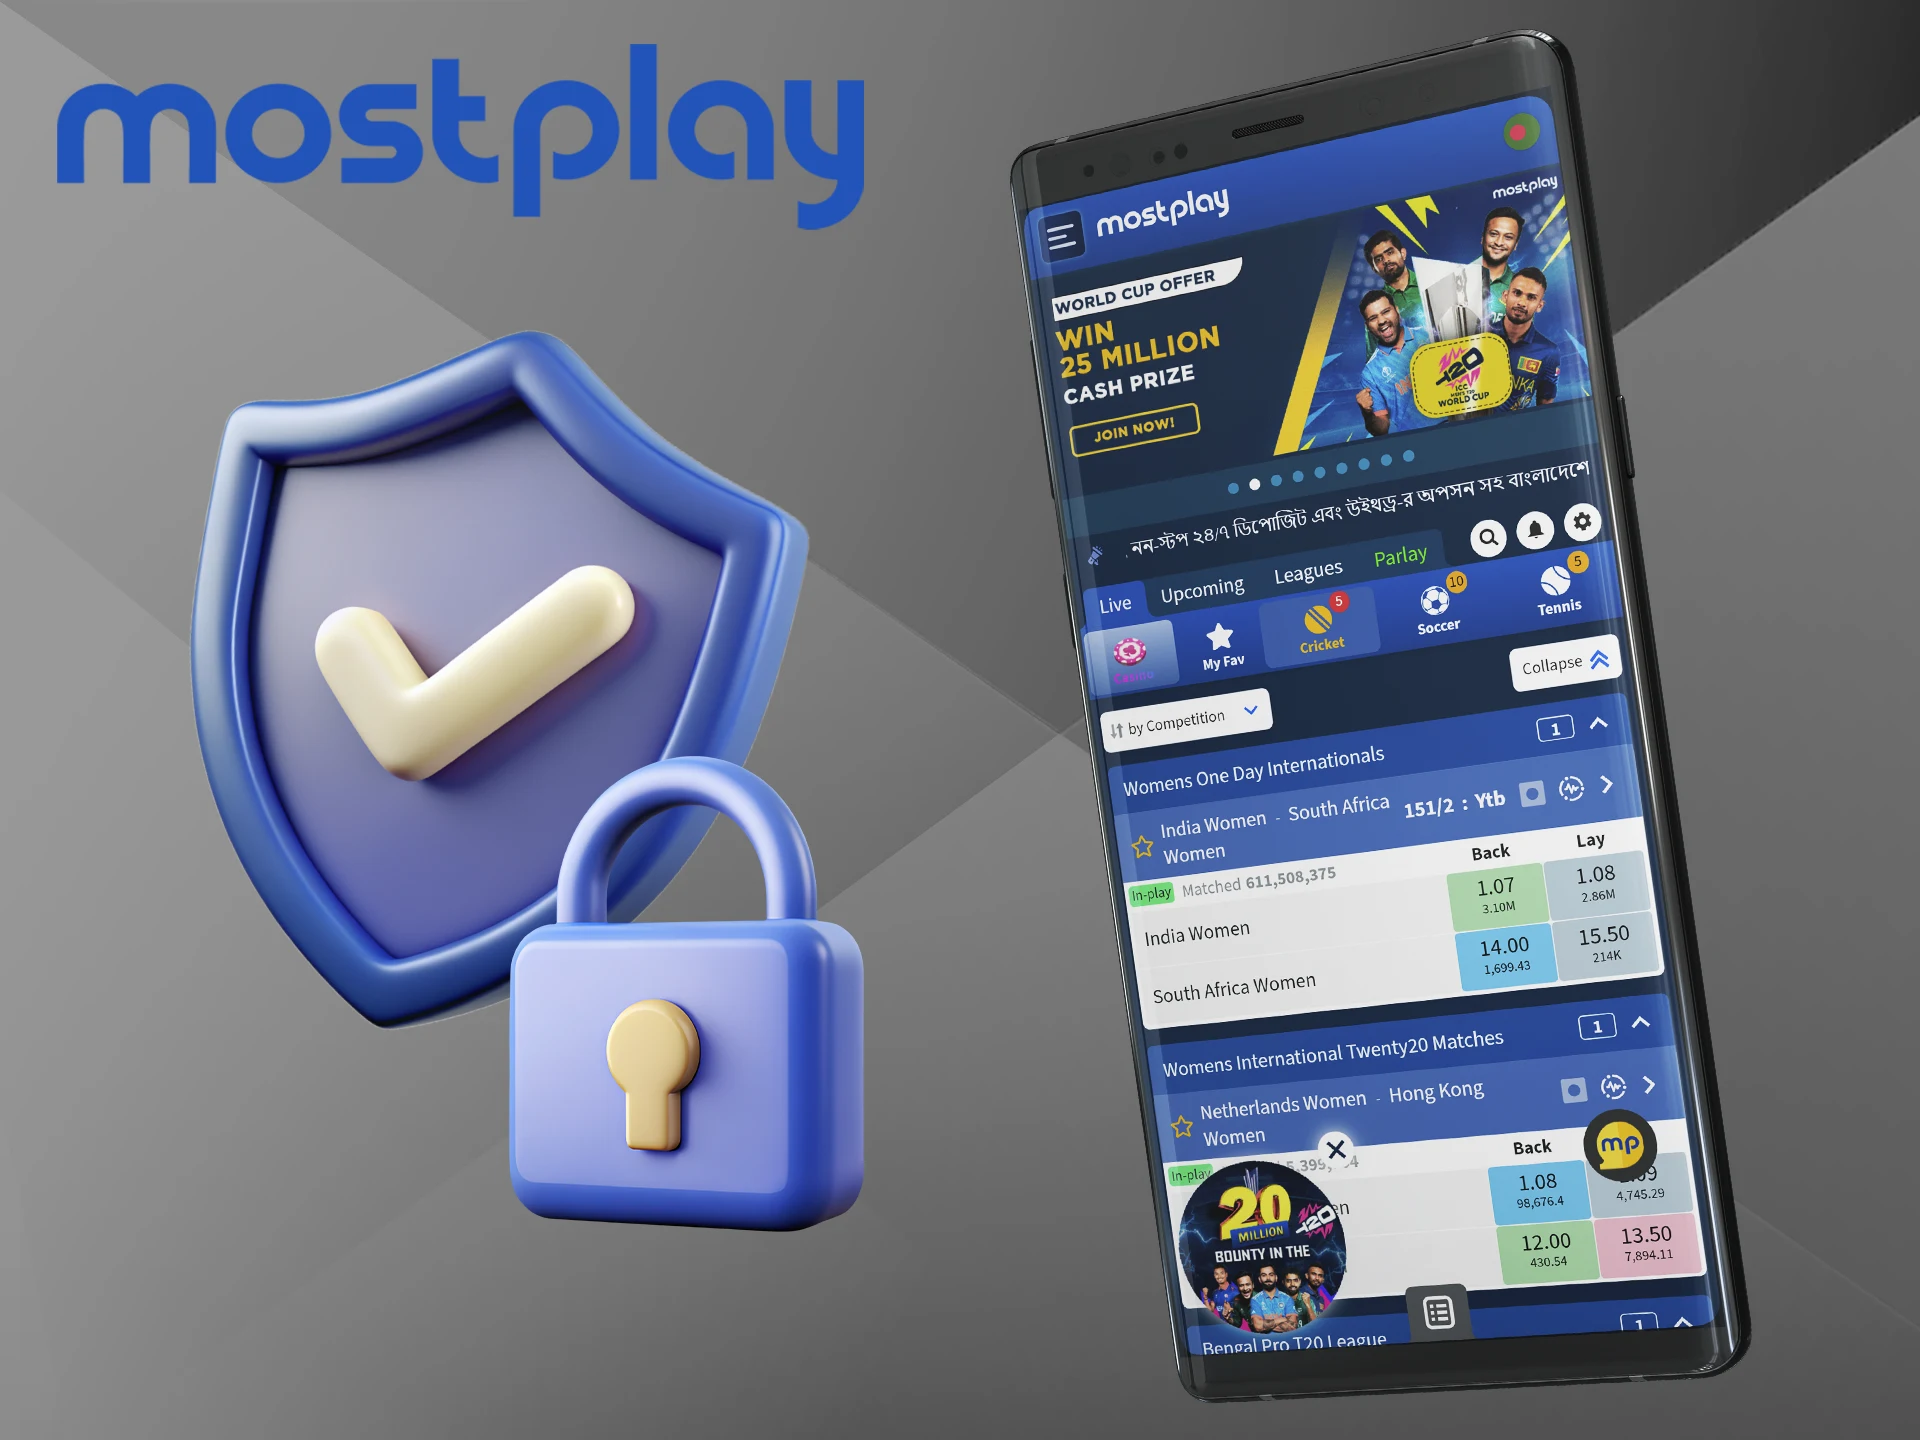 Place your bets at Mostplay and don't worry about your safety.